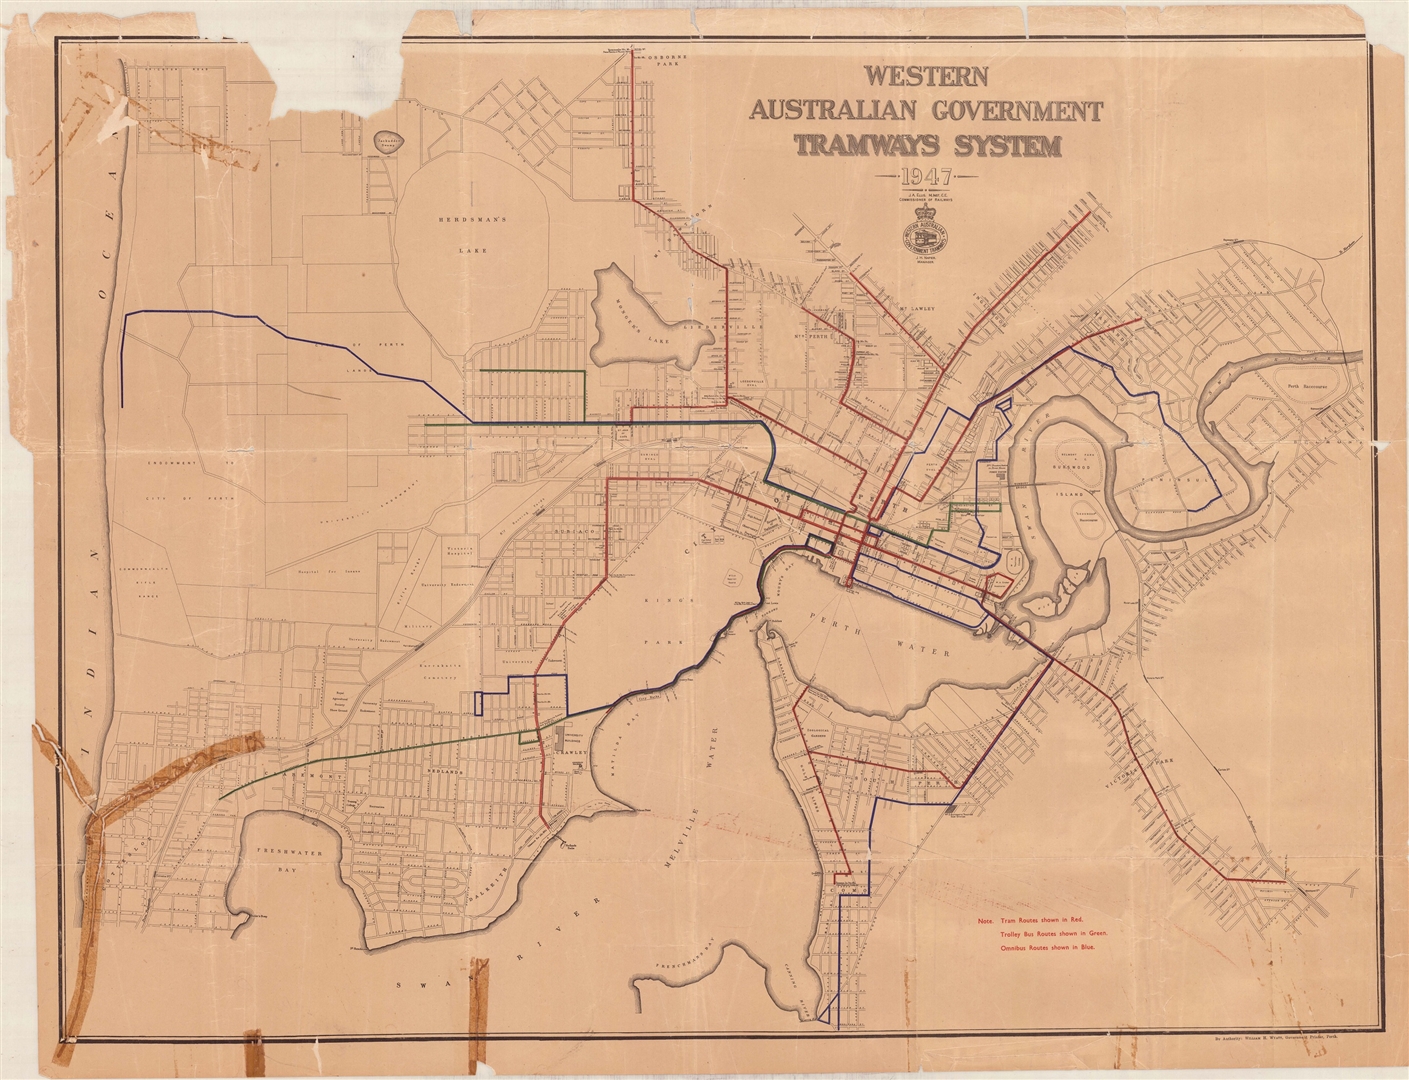 West Australian Government Tramways System 1947 Image